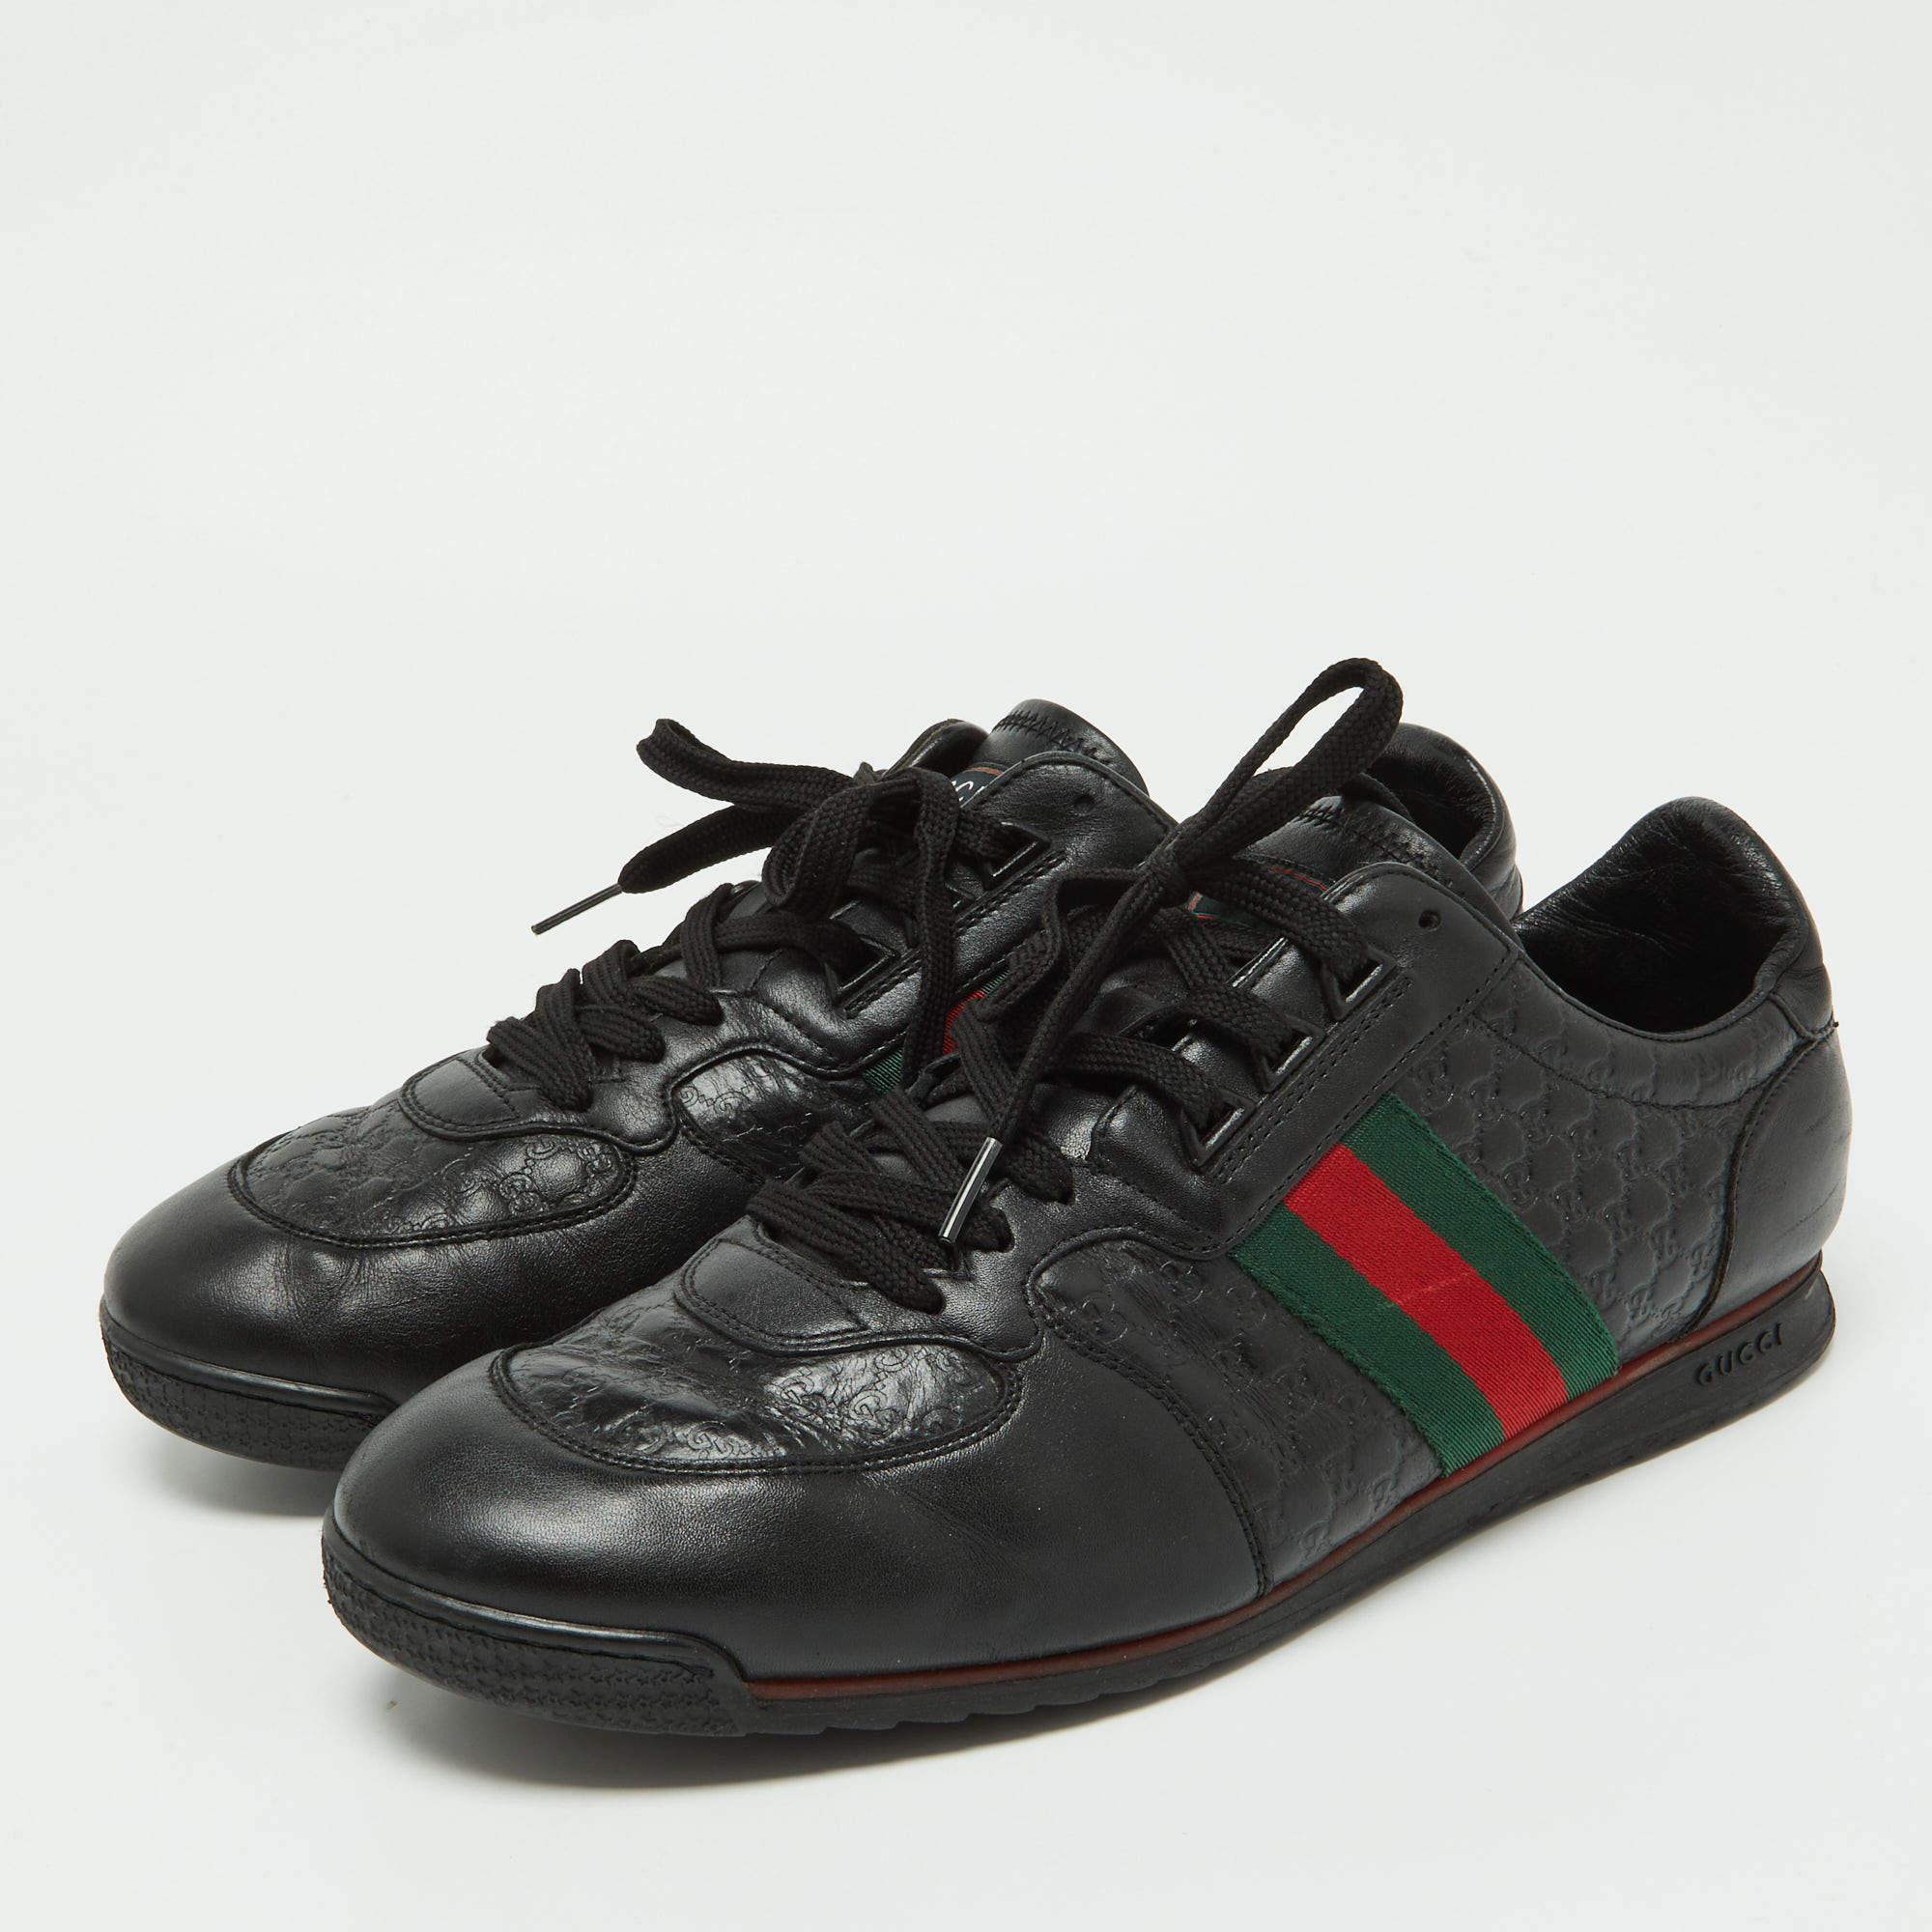 Gucci Black Leather Web Lace Up Sneakers Size 45.5 2